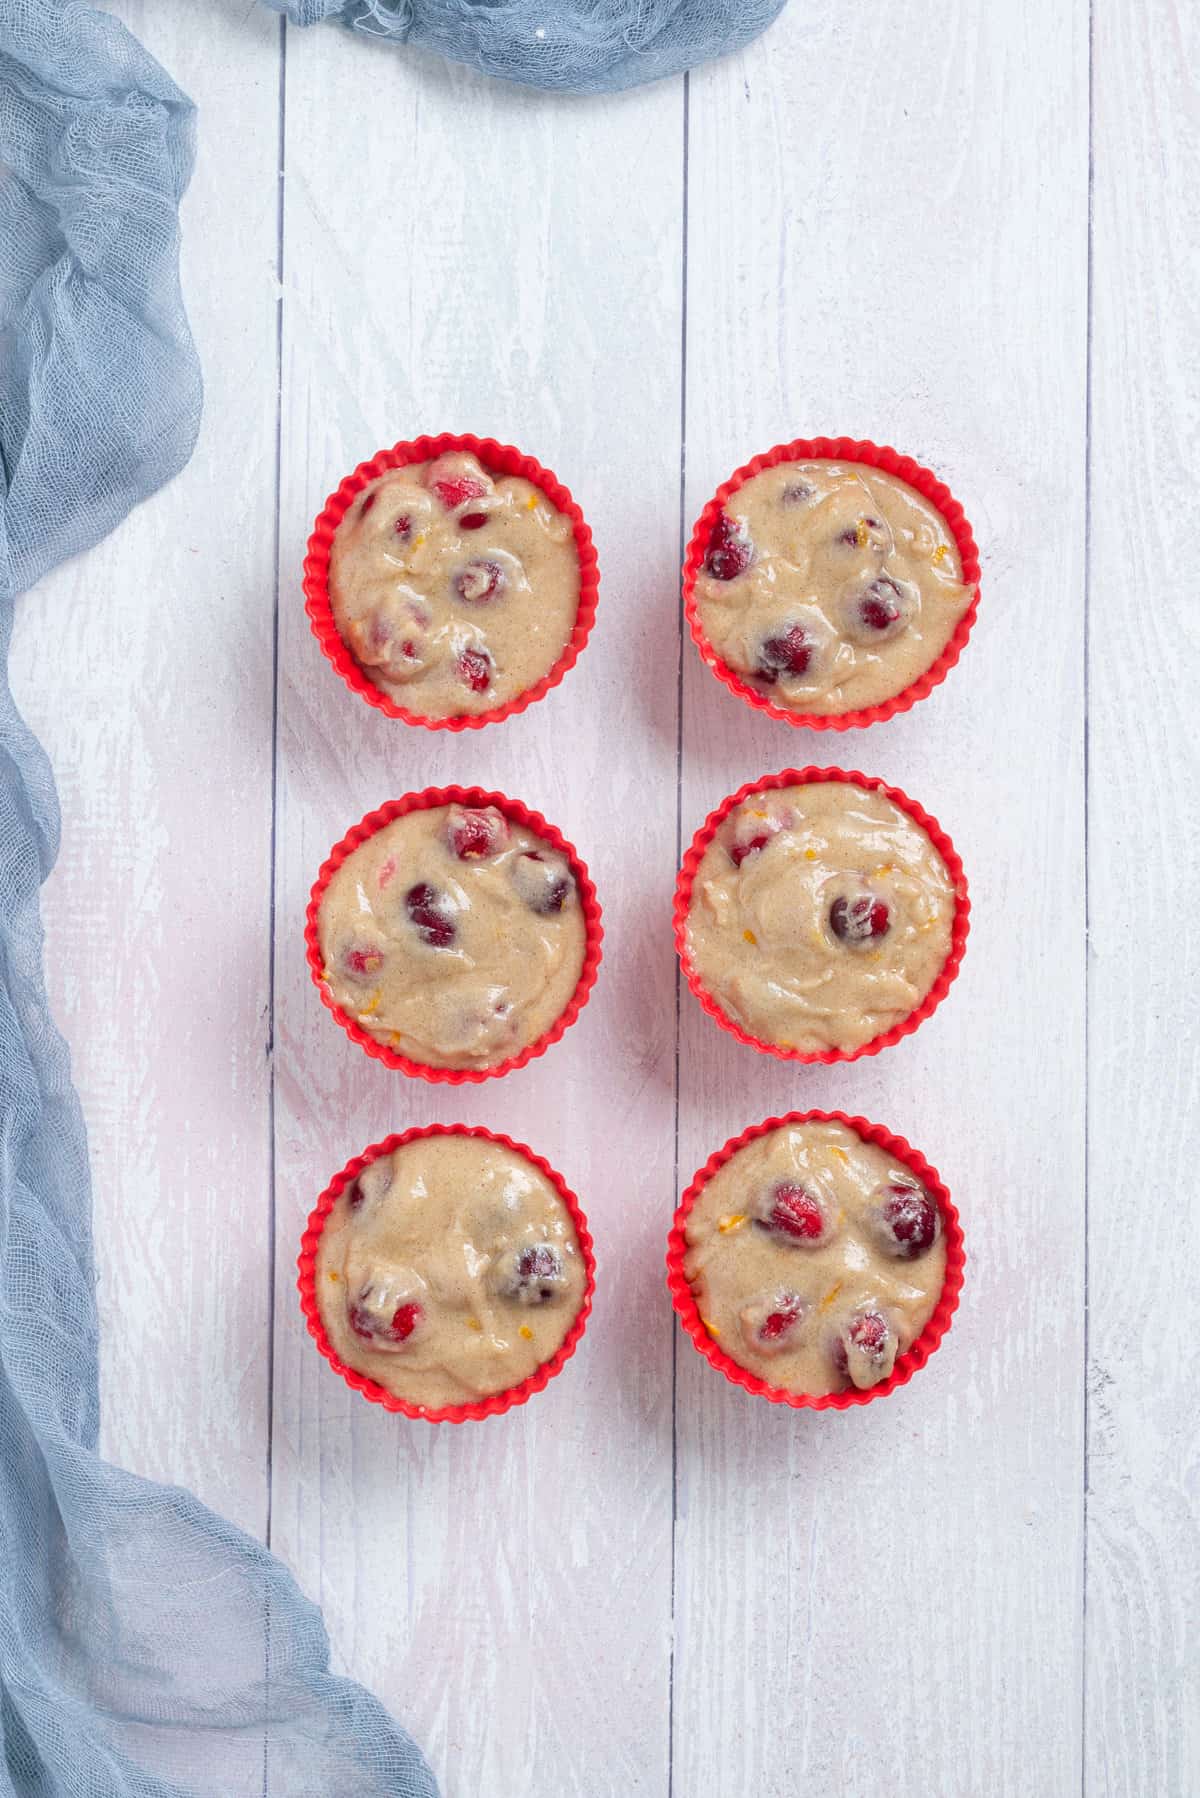 An overhead image of the muffin batter in muffin tins arranged side by side.